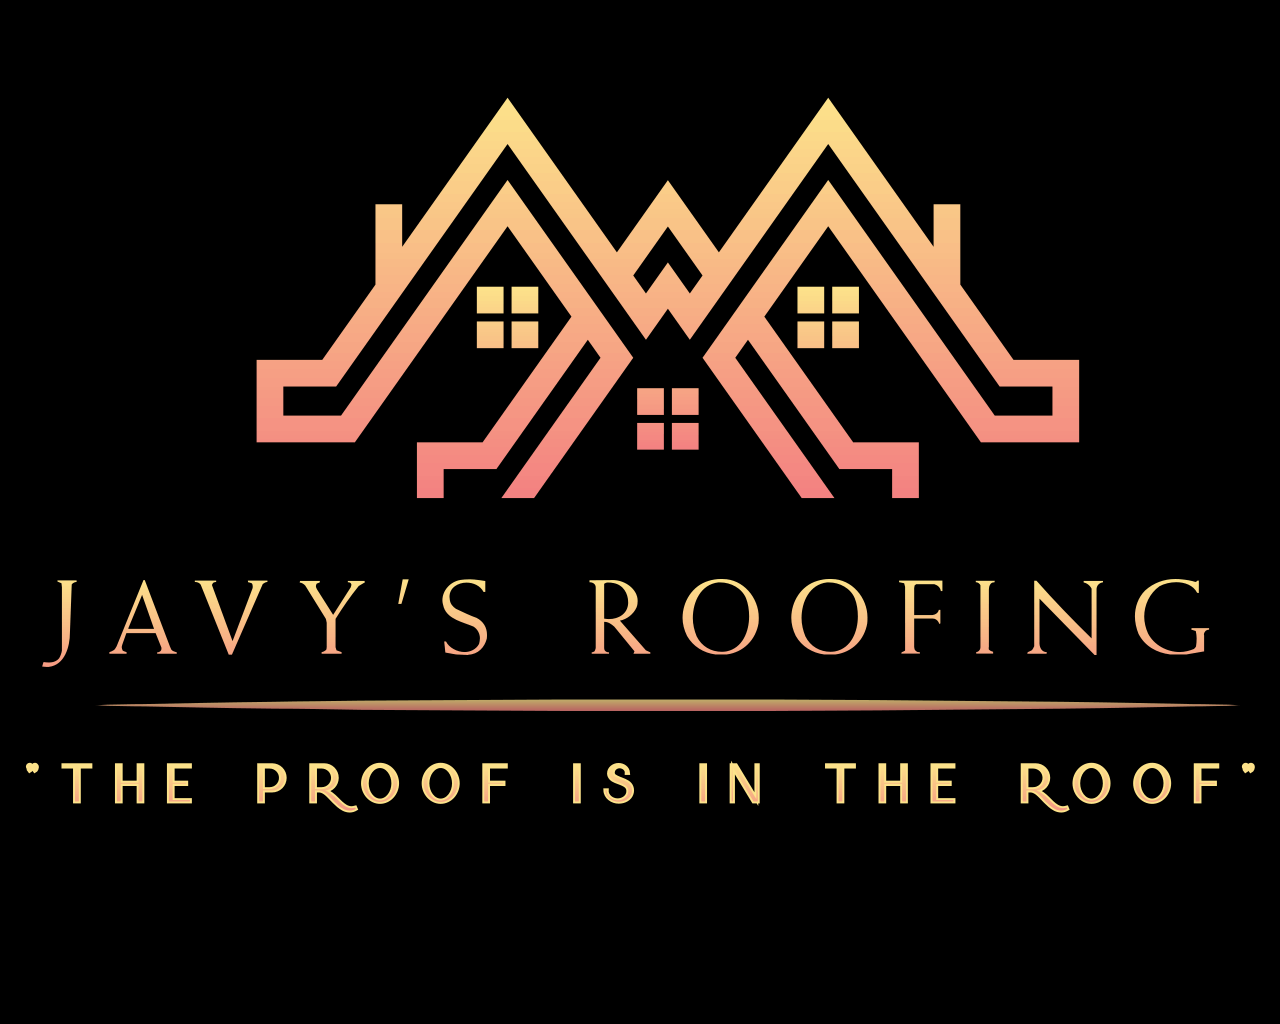 Javy's Roofing